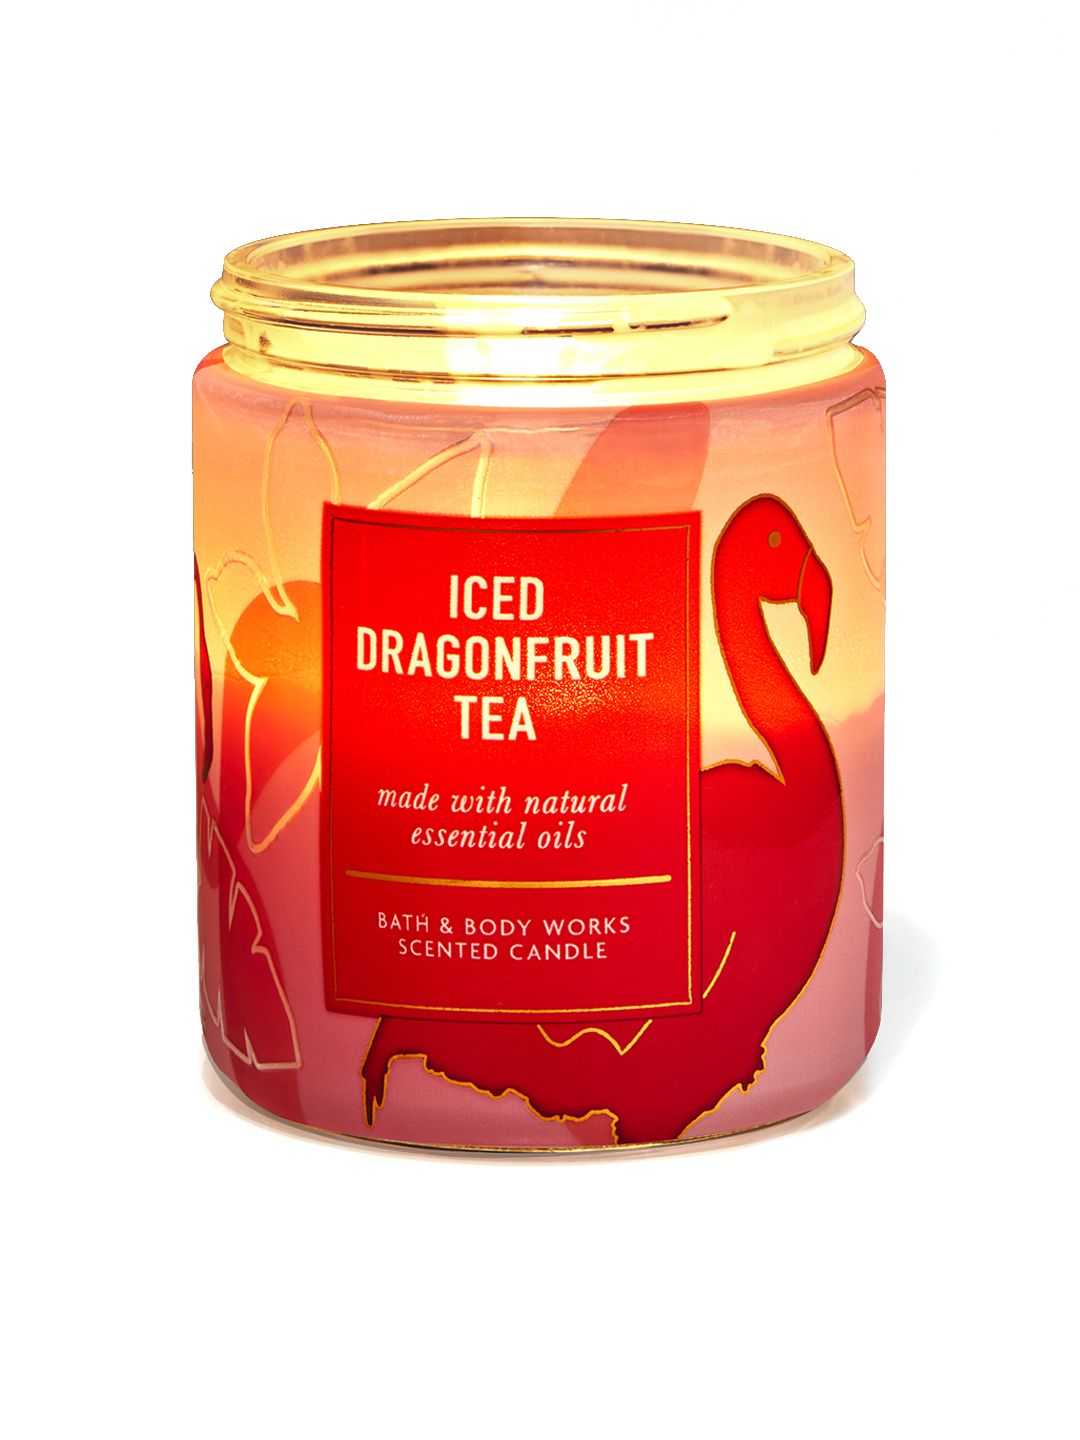 Bath & Body Works Iced Dragonfruit Tea Single Wick Scented Candle - 198 g Price in India